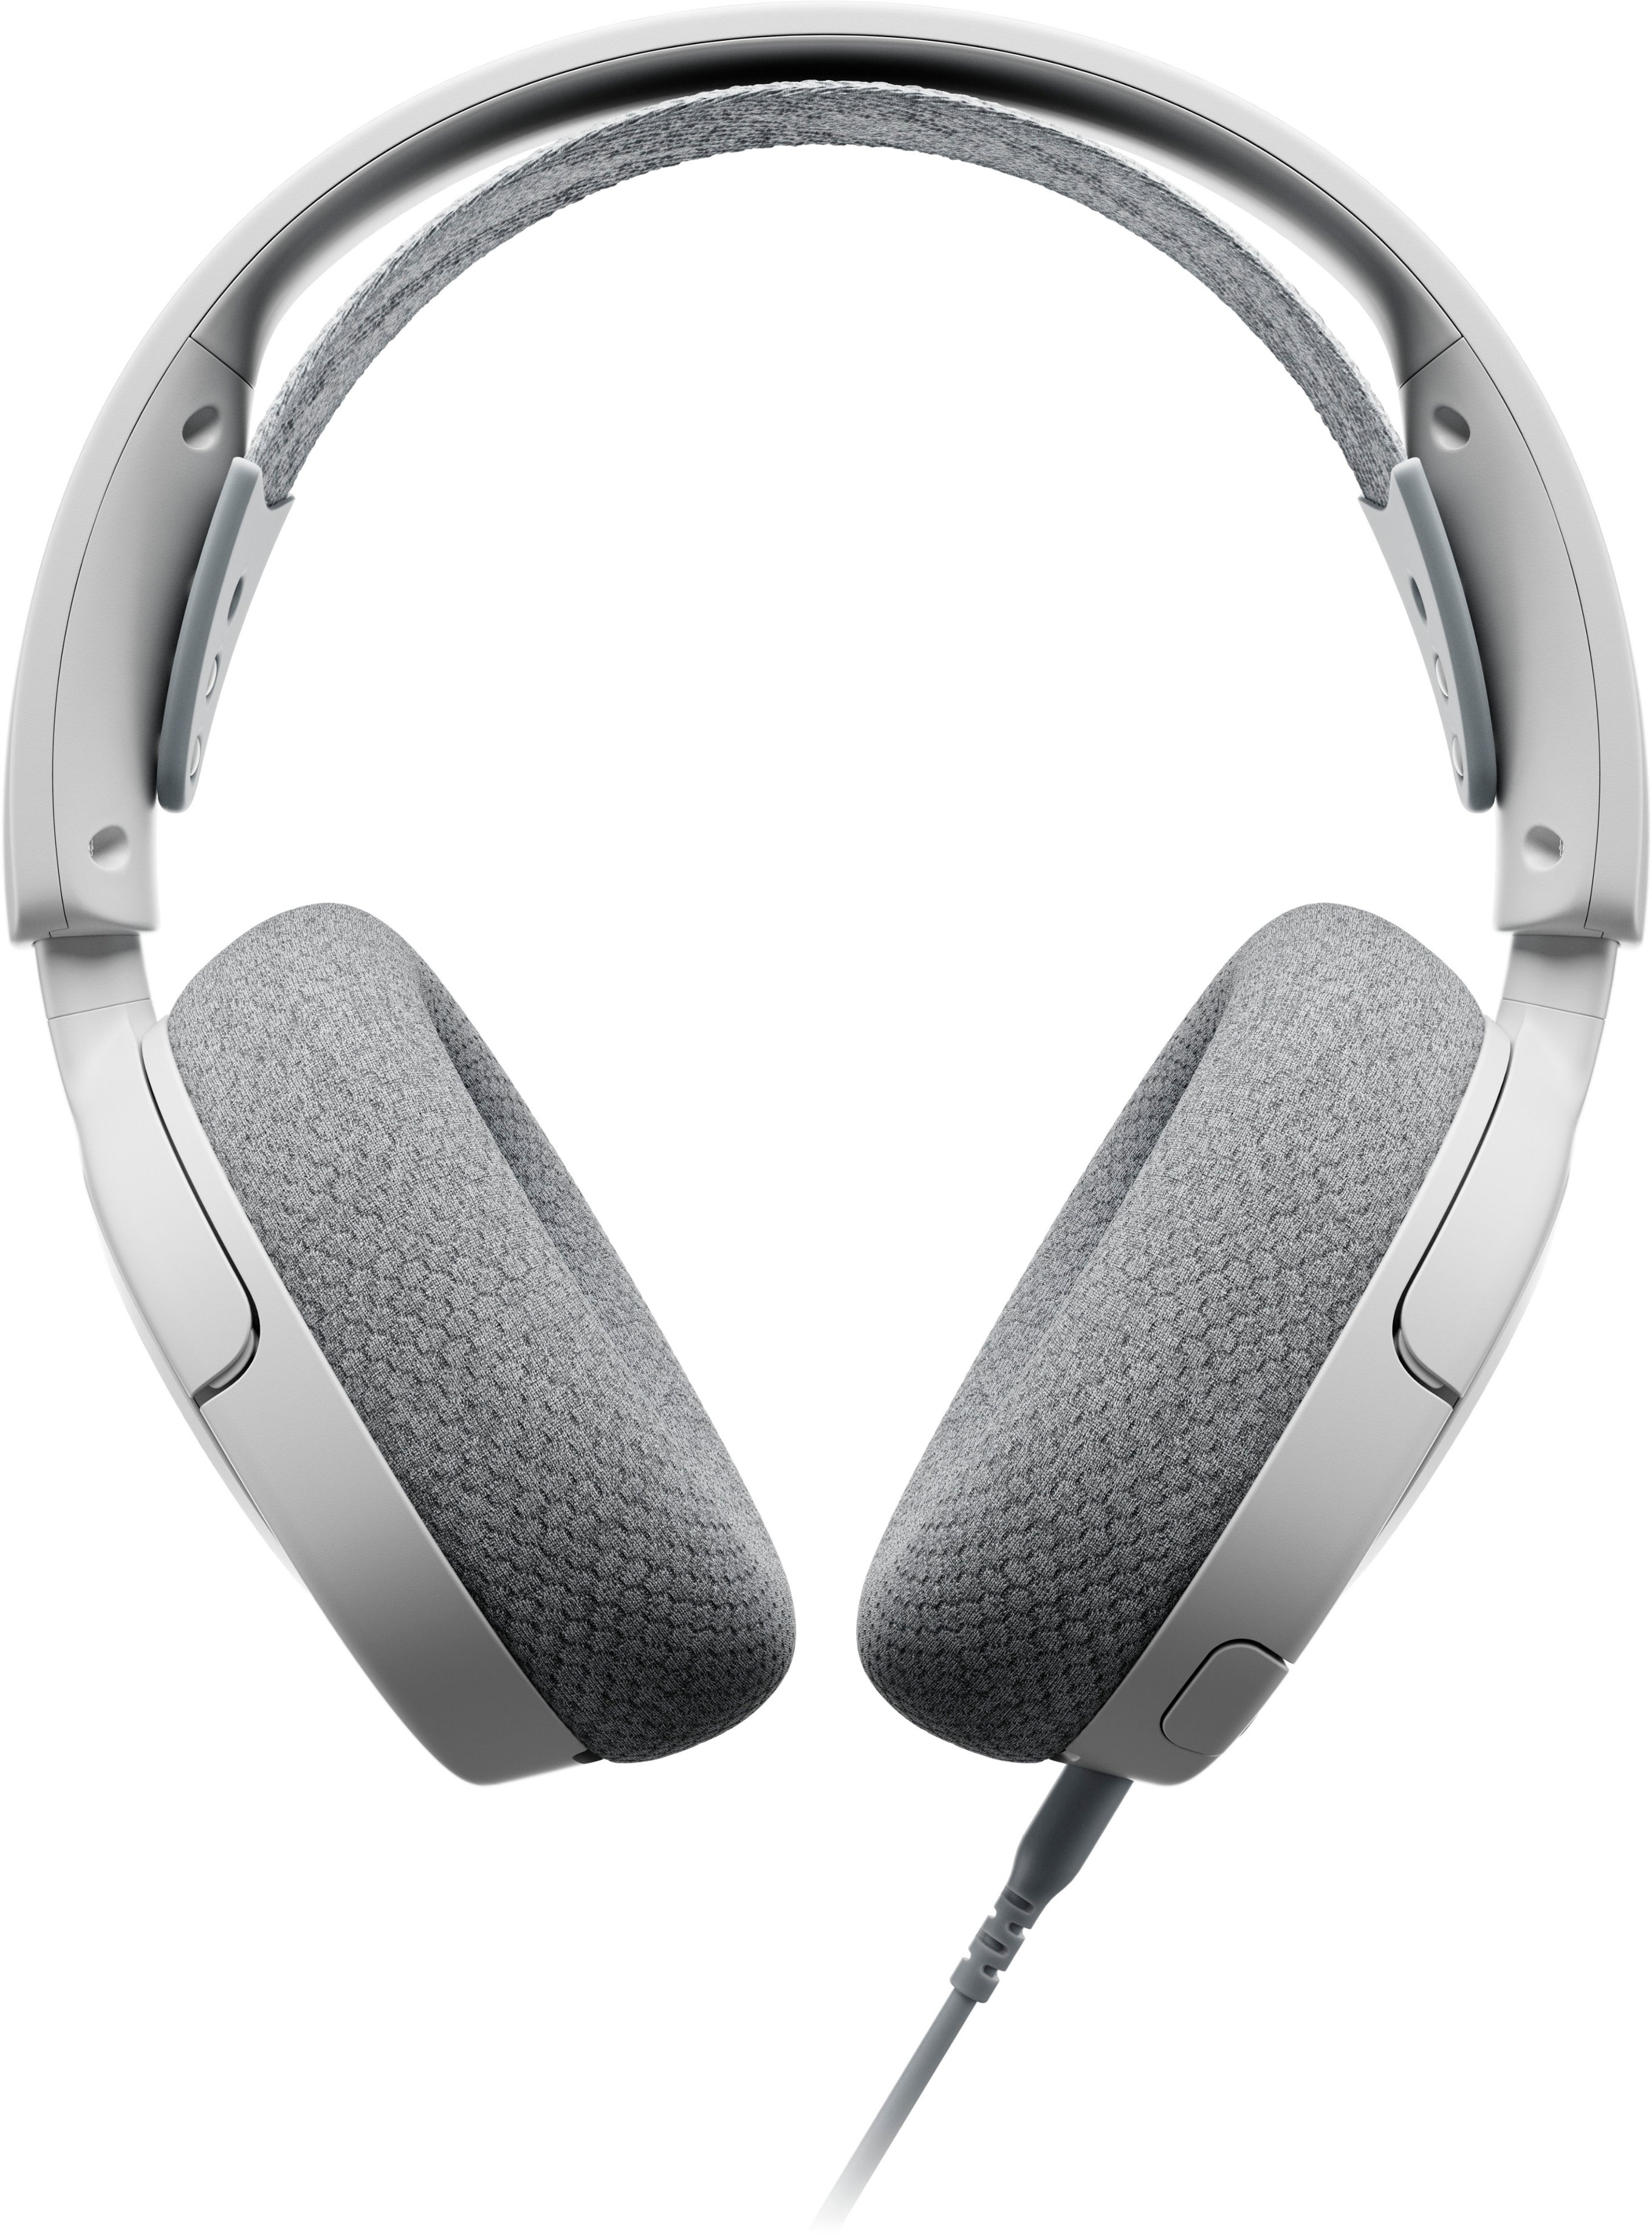 Angle View: SteelSeries - Arctis Nova 1 Wired Gaming Headset for PC - White